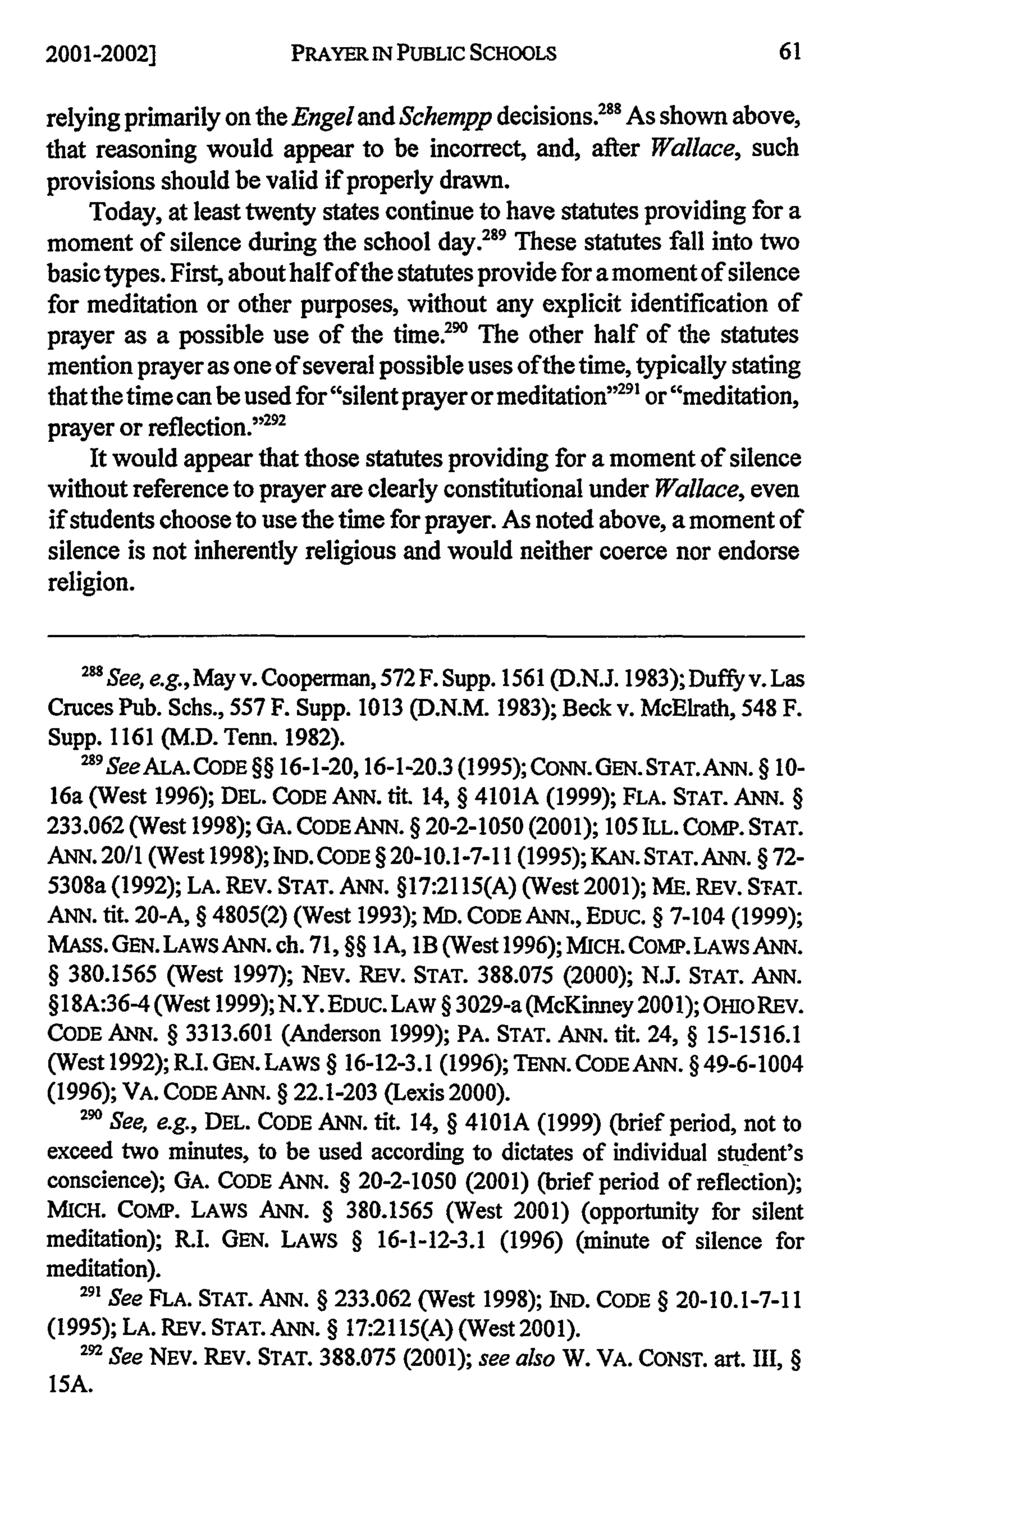 2001-2002] PRAYER IN PUBLIC SCHOOLS relying primarily on the Engel and Schempp decisions.